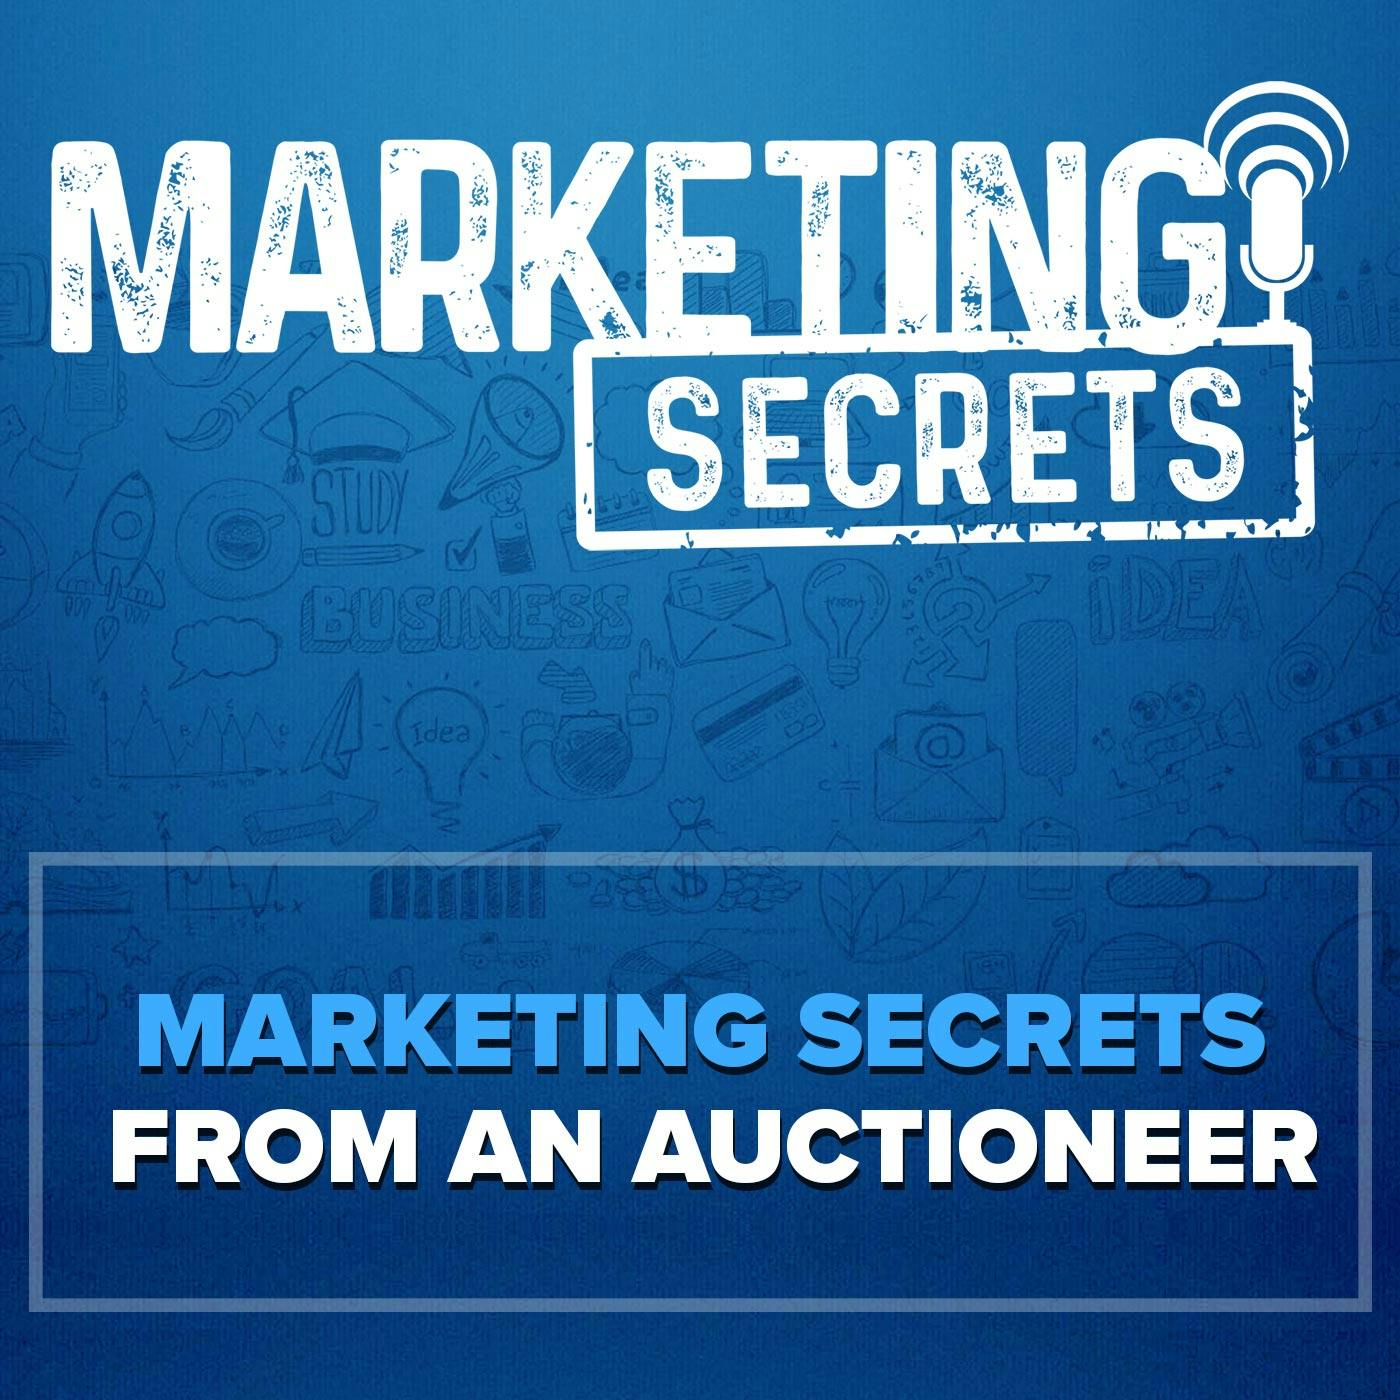 Marketing Secrets From An Auctioneer